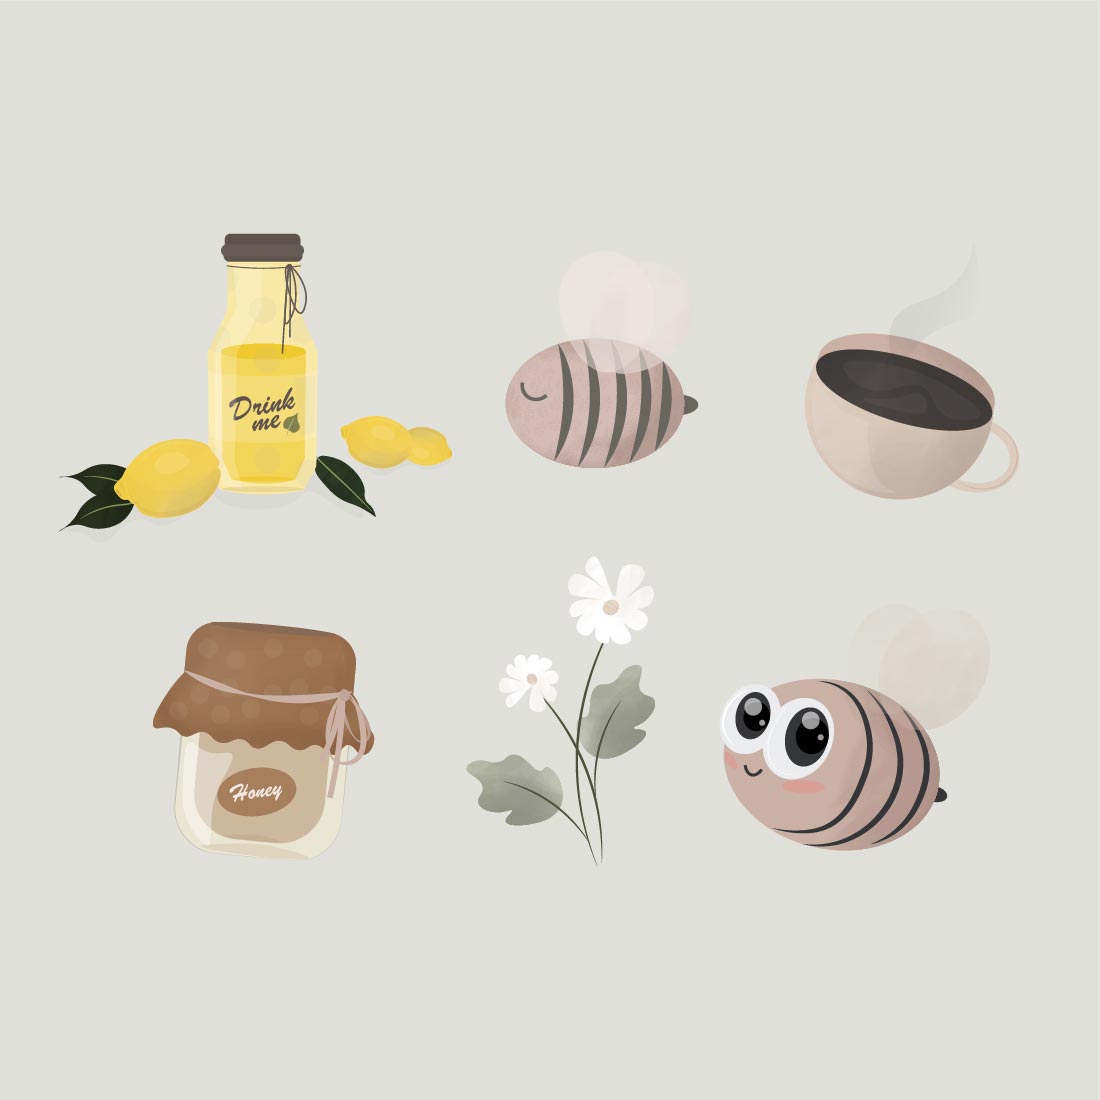 Bees Illustrations And Spring Patterns Preview Image.